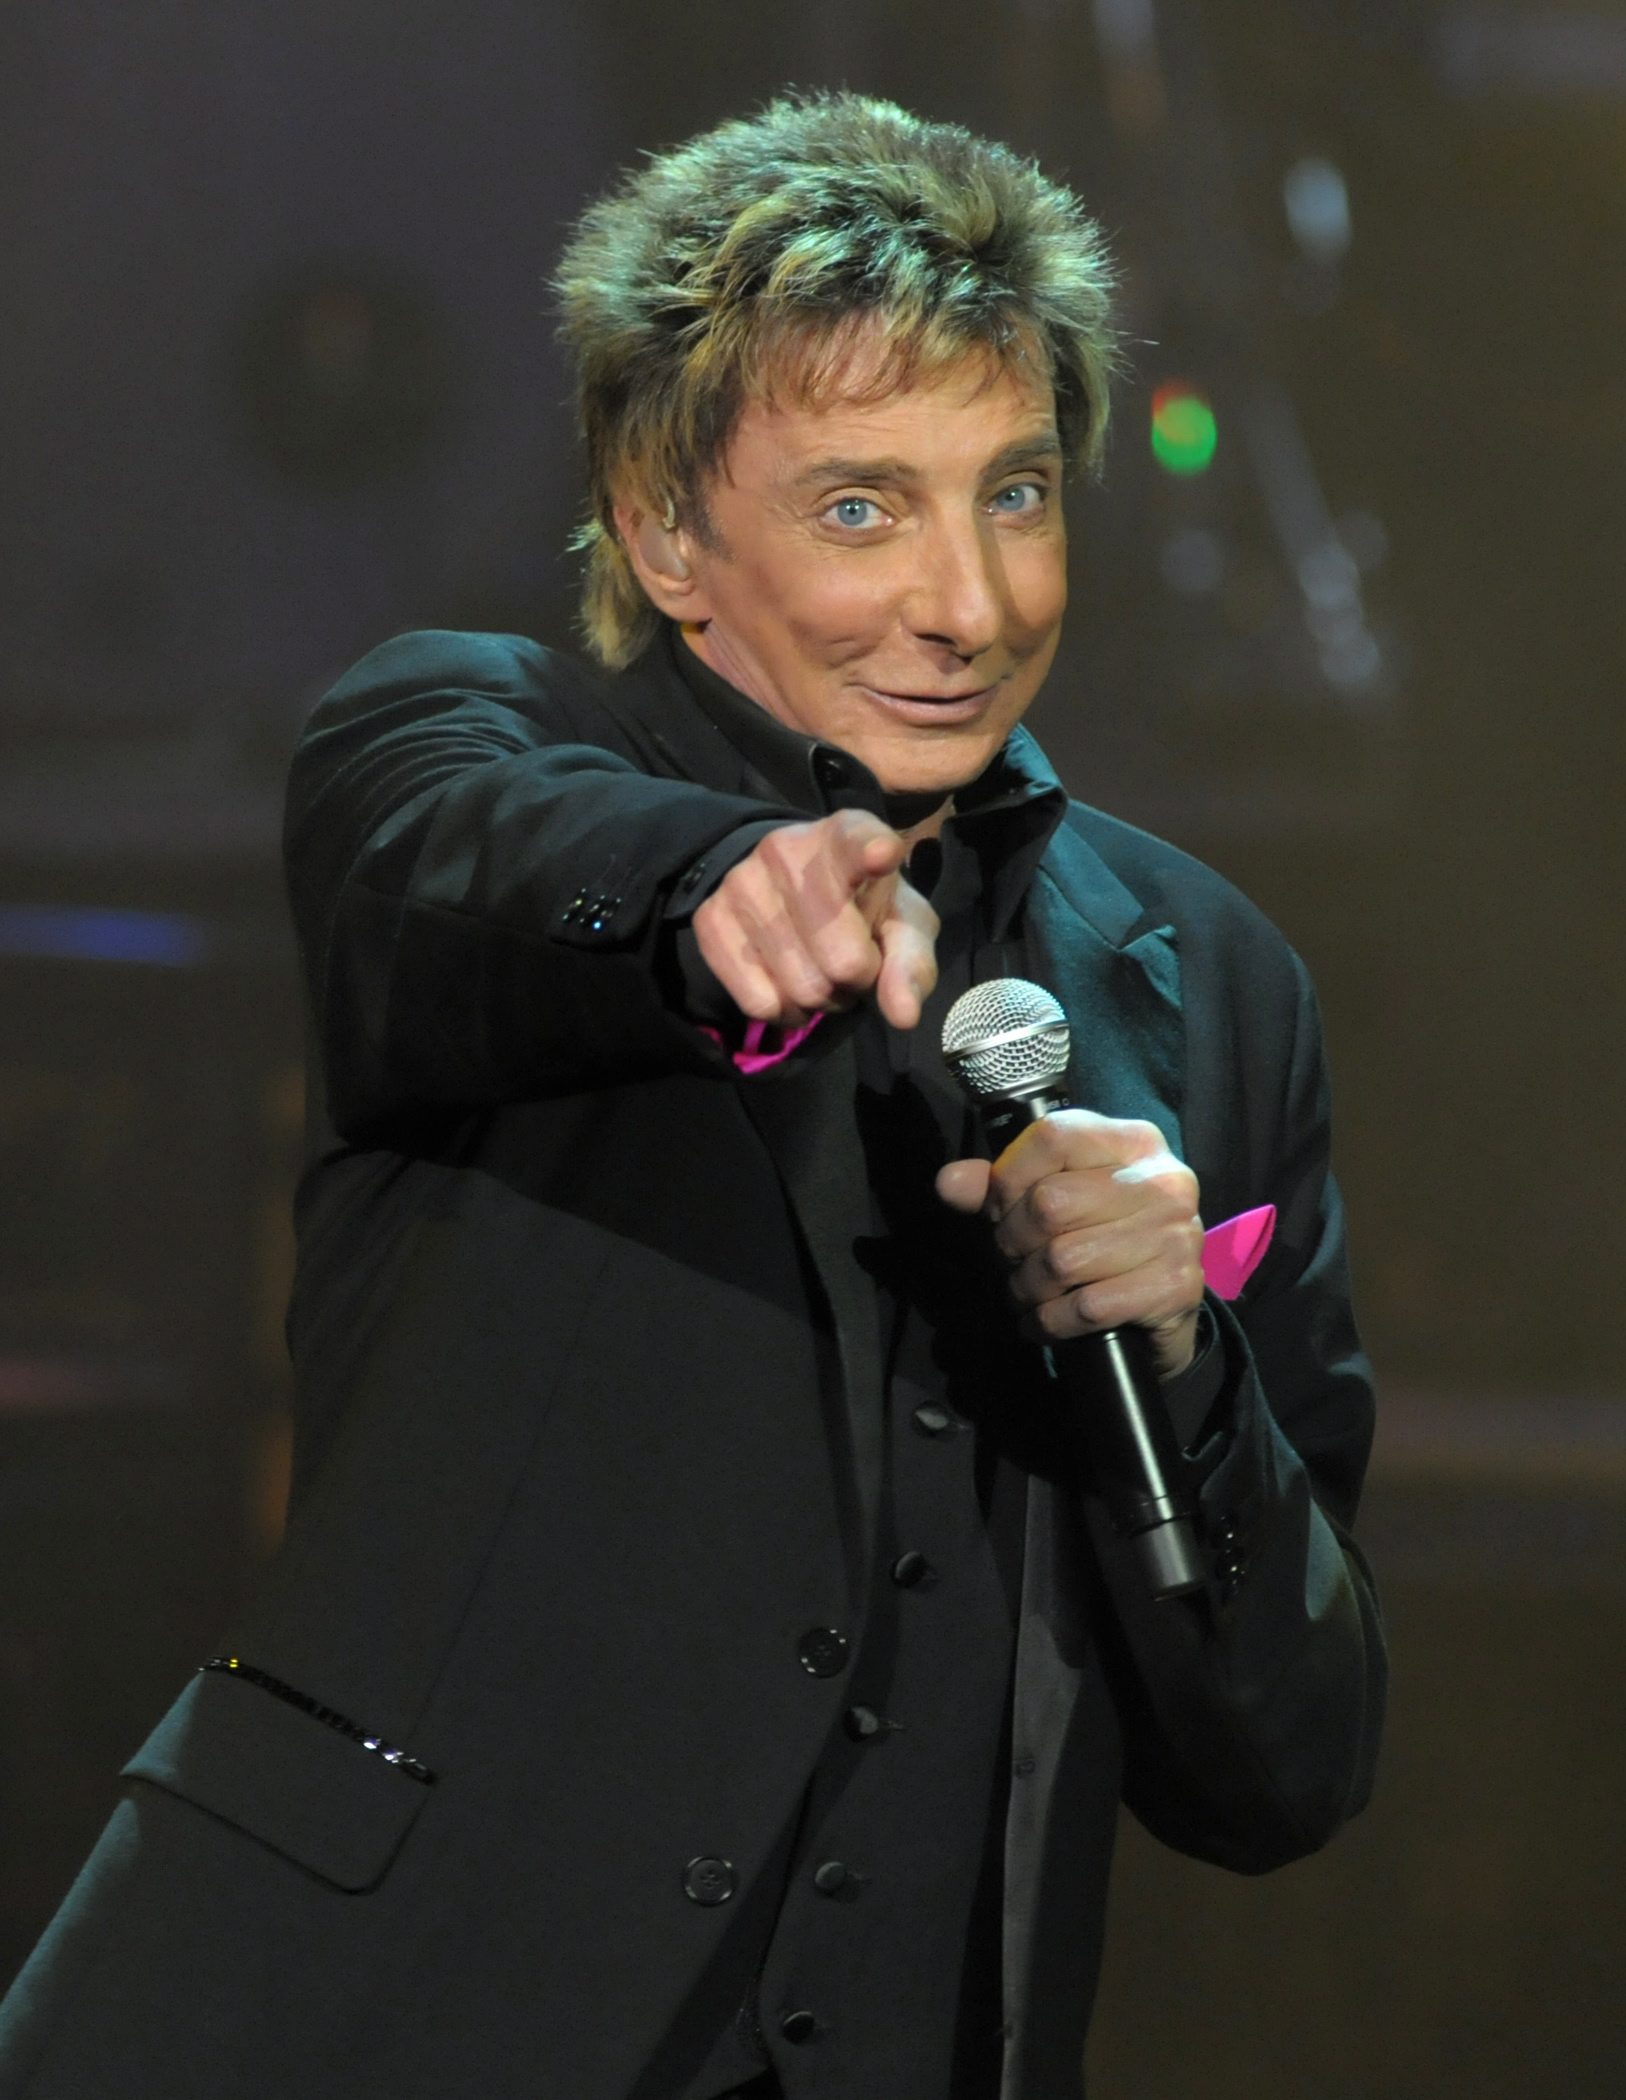 Barry Manilow #7